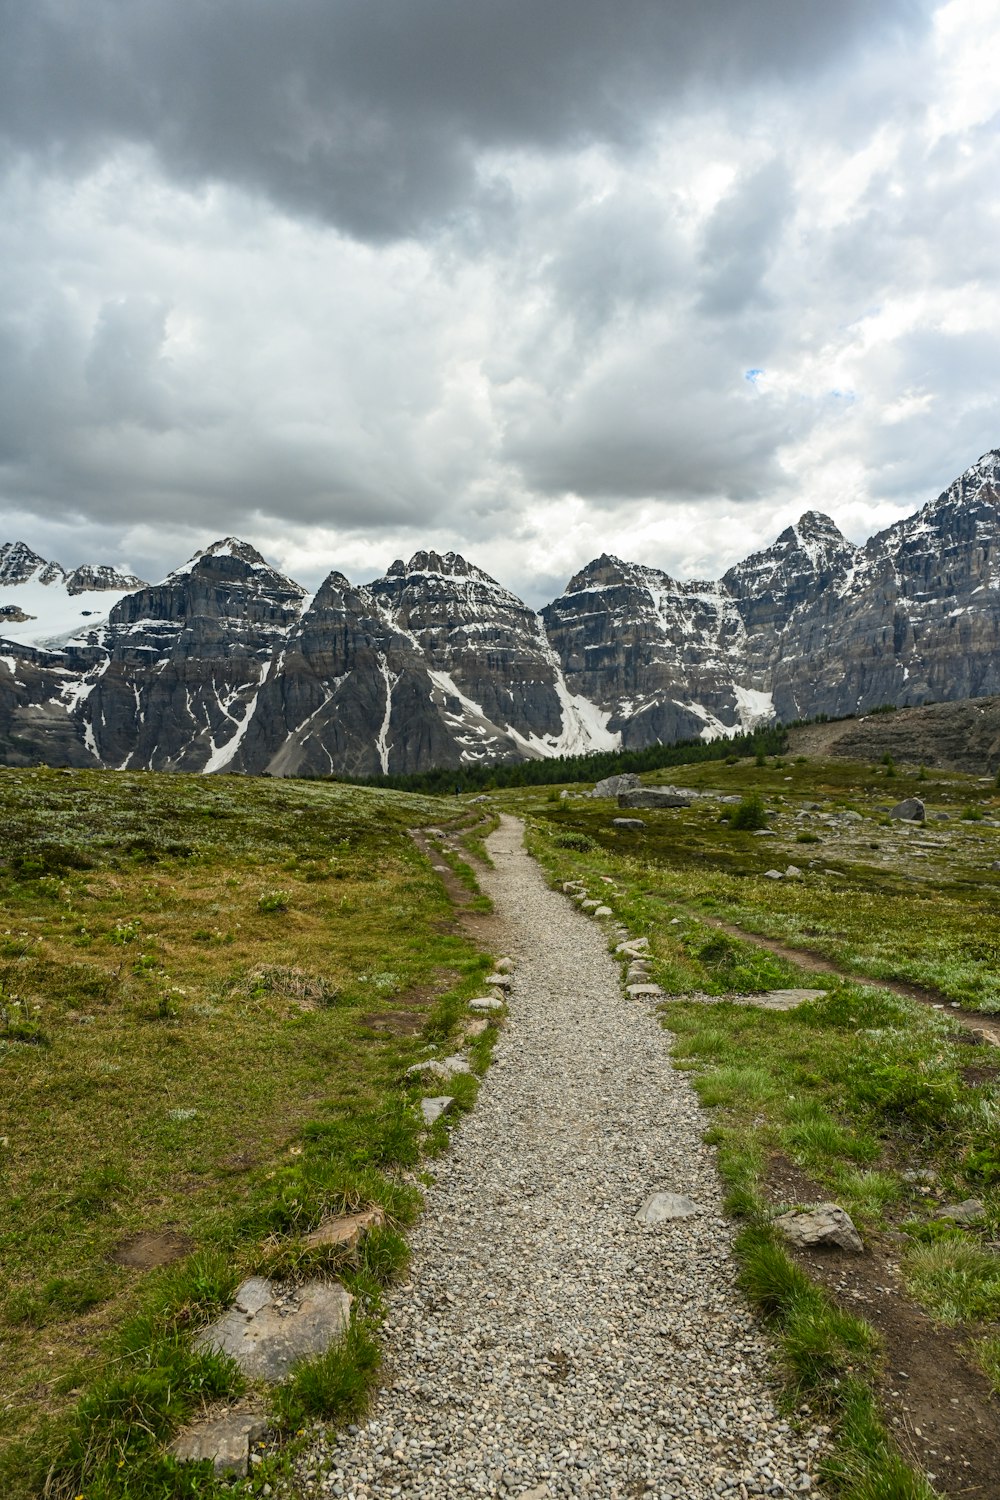 a trail winds through a grassy field with mountains in the background